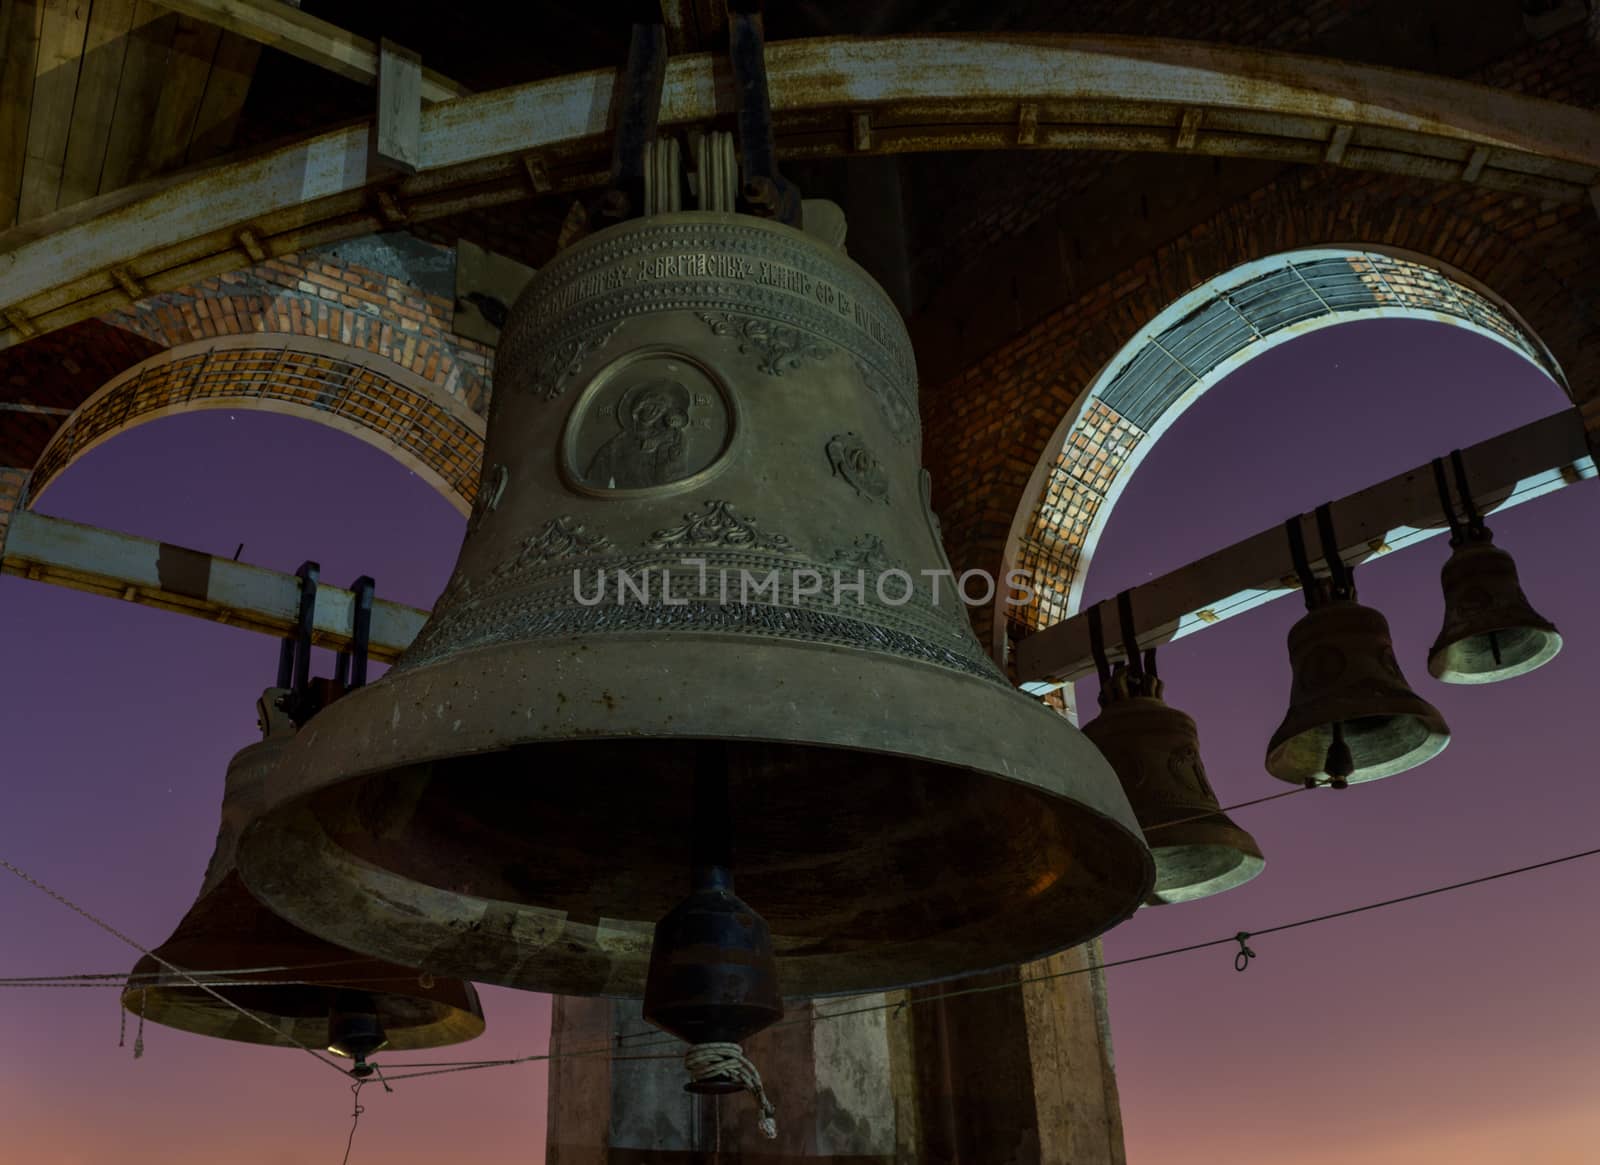 Night view at the full moon of the bells at the Cathedrals’ belfry by straannick